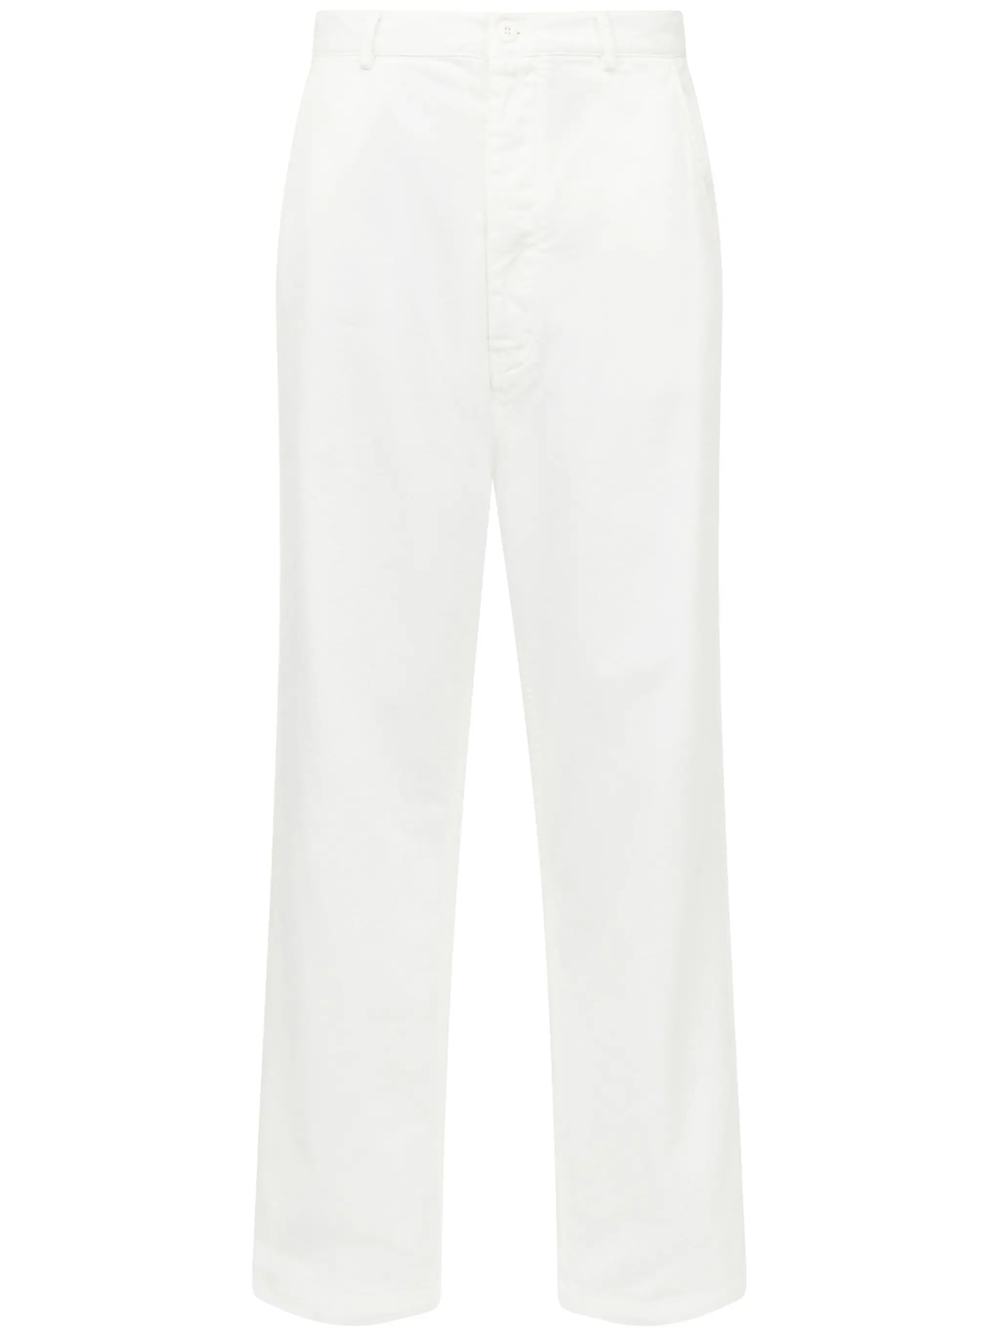 Mm6 Maison Margiela Straight Mid-rise Trousers In White